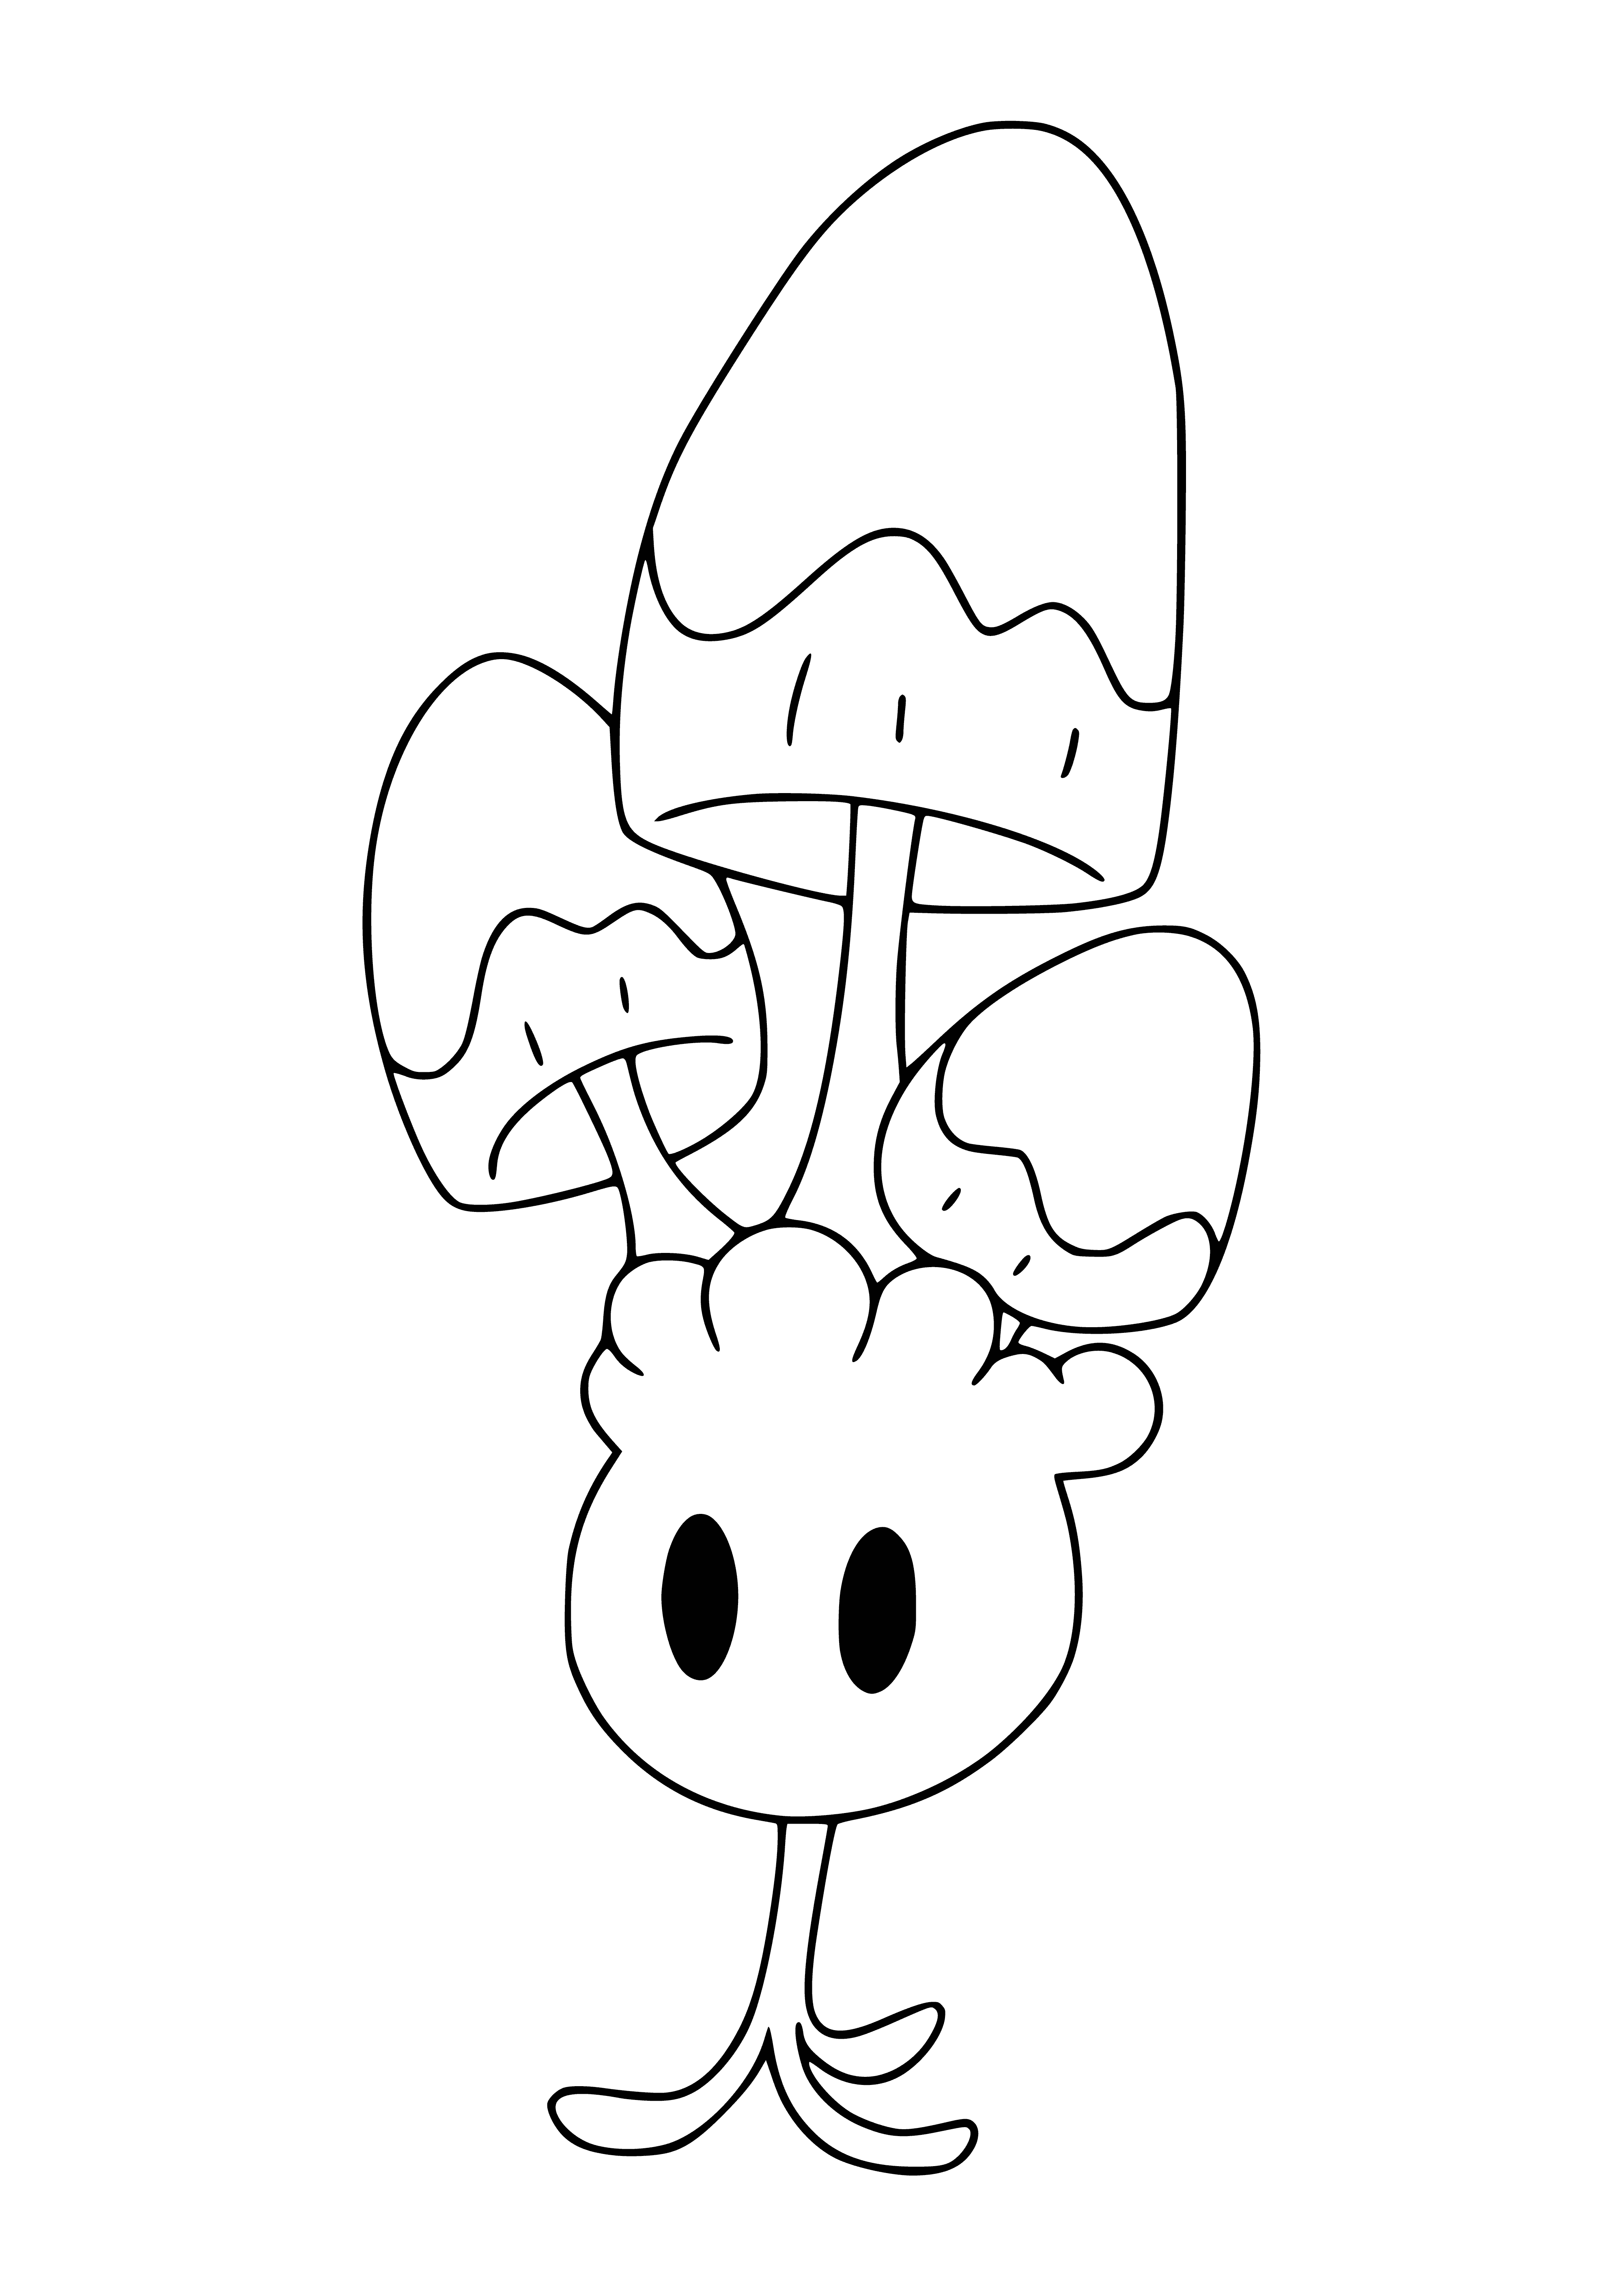 coloring page: Morelull is a small, mushroom-like Pokémon with large eyes, black spots, small arms & legs and a black stem with a white bulb at the end.